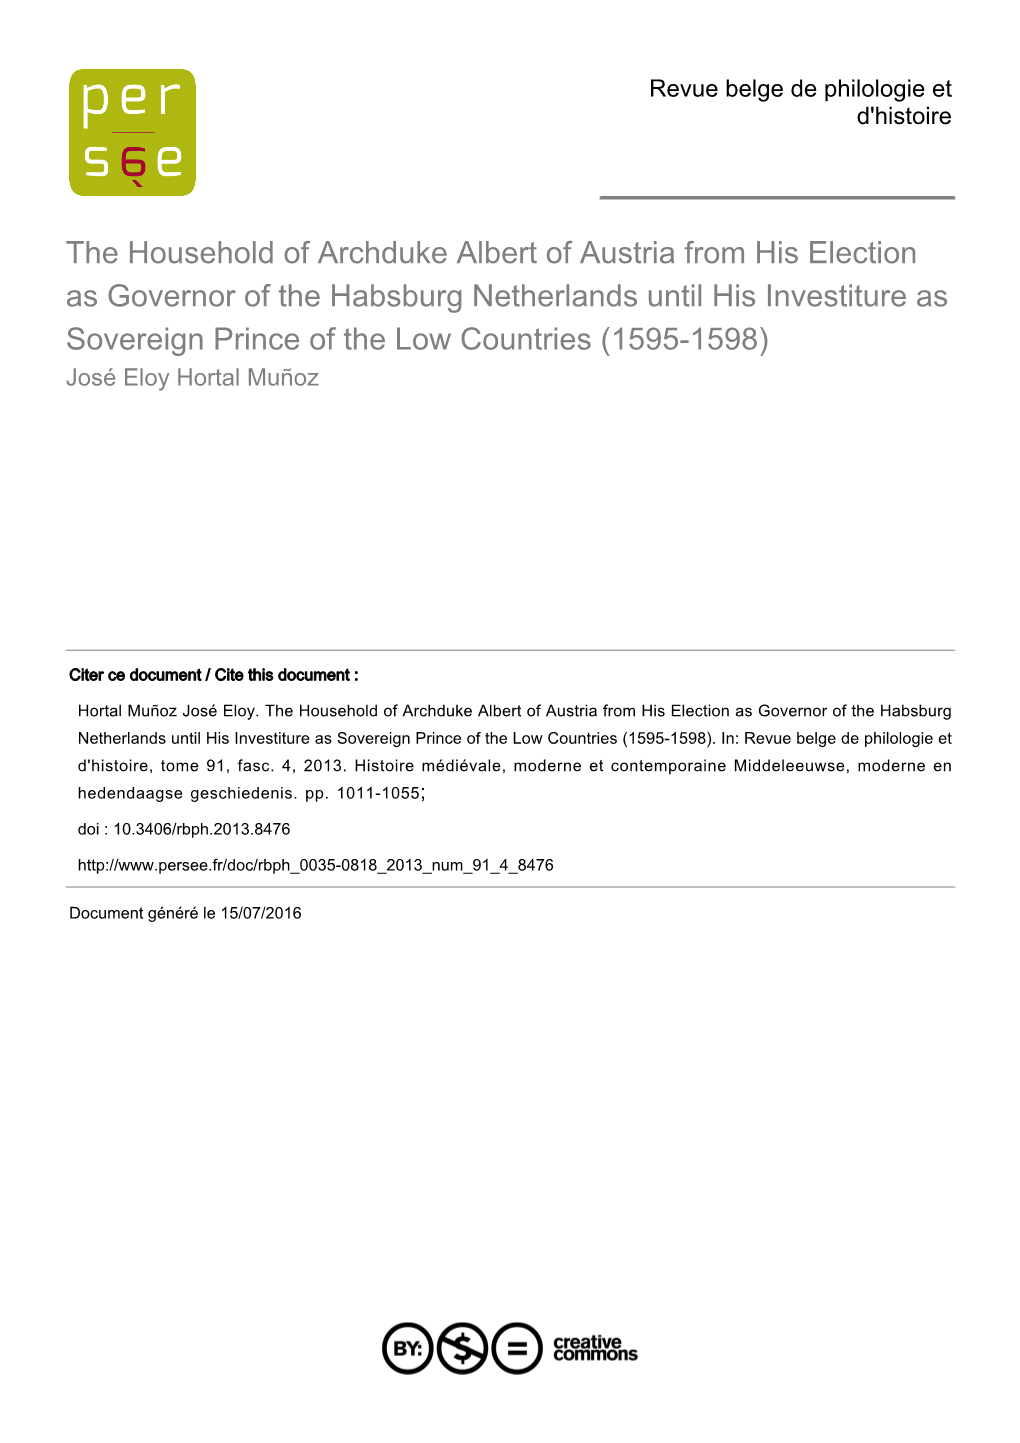 The Household of Archduke Albert of Austria from His Election As Governor of the Habsburg Netherlands Until His Investiture As S